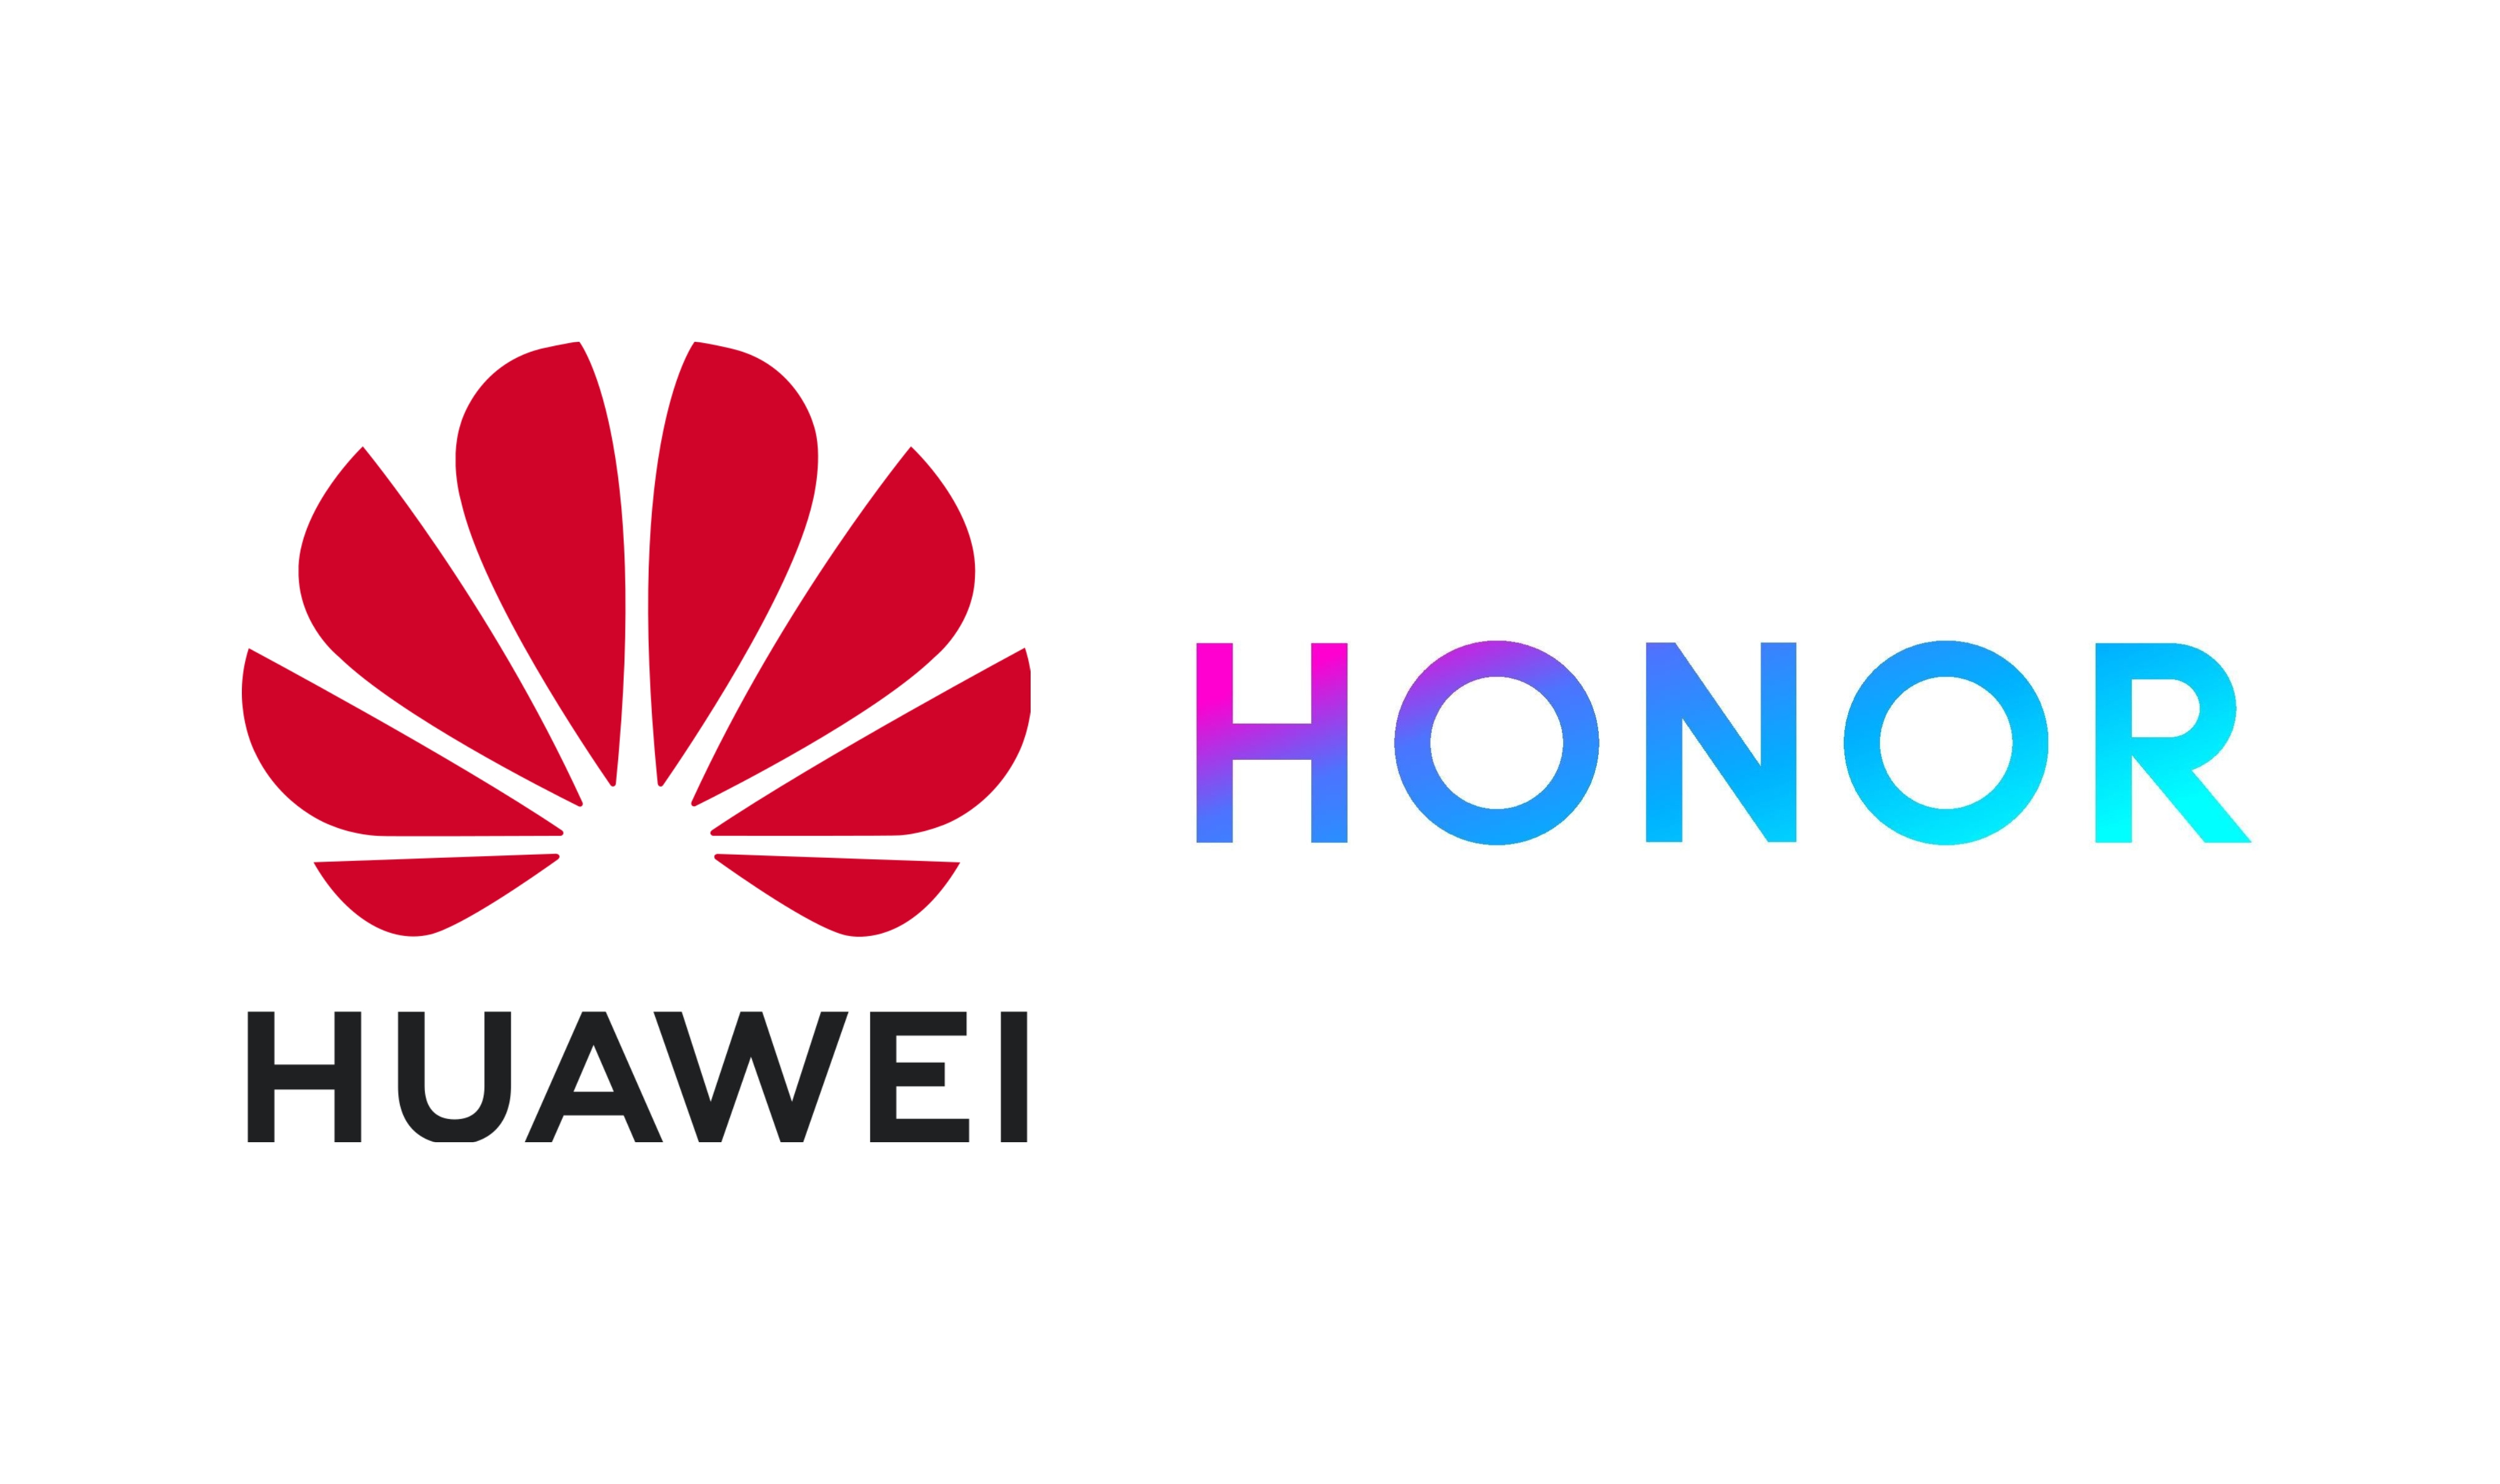 Leak] Here's the list of new Huawei and Honor smartphones/laptops launching in Europe - Gizmochina